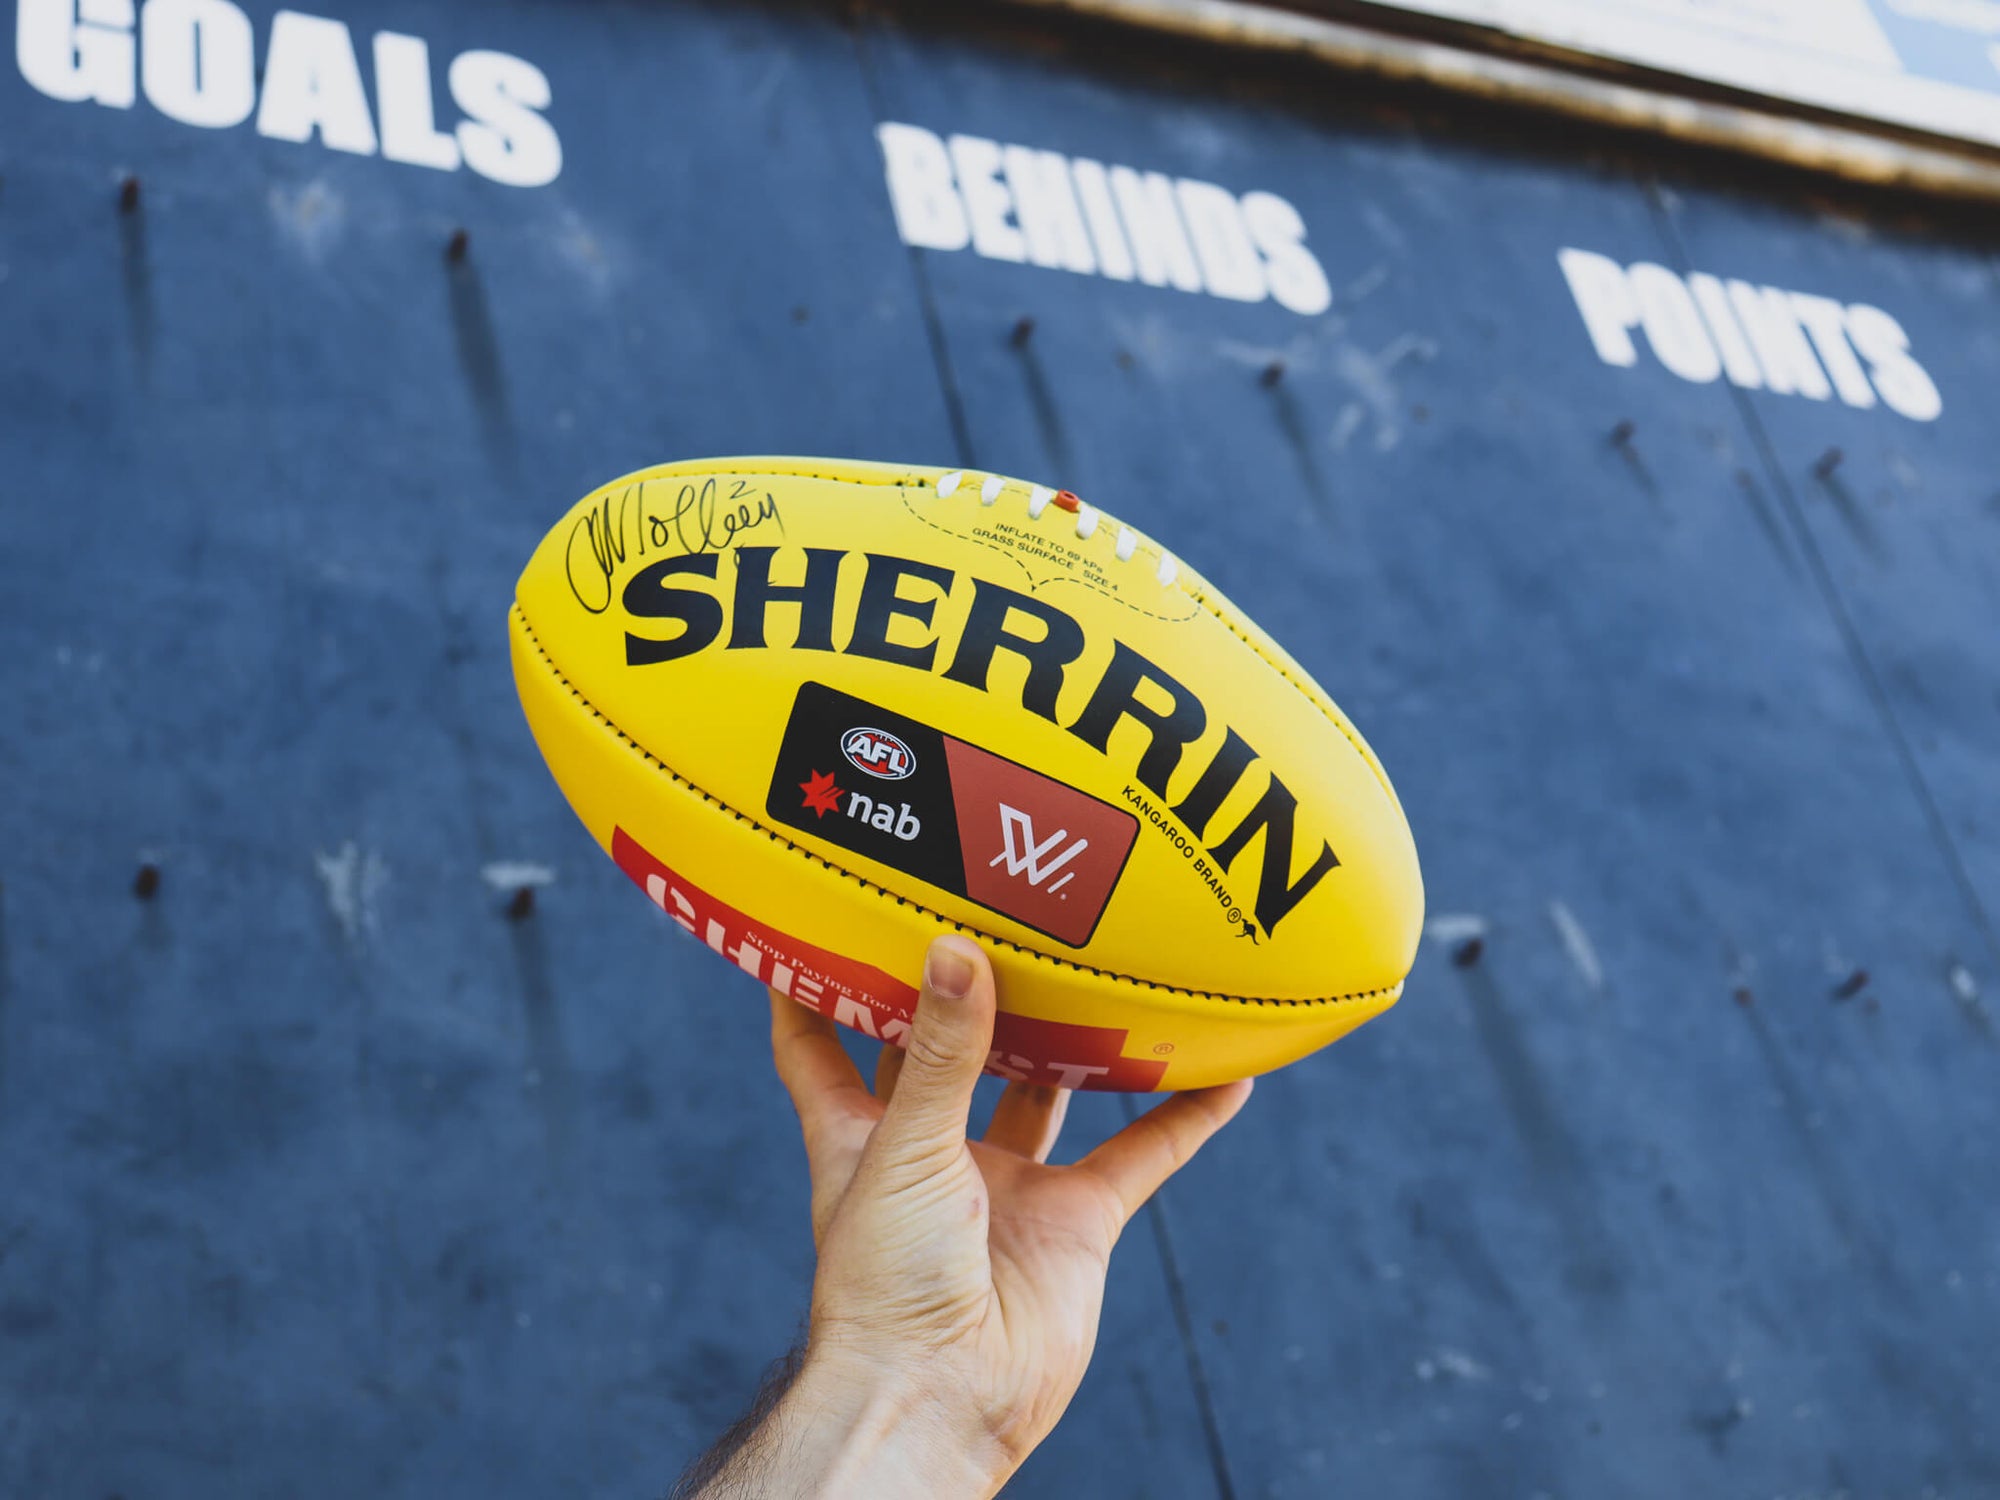 Holding a Sherrin AFL football in front of a score board.